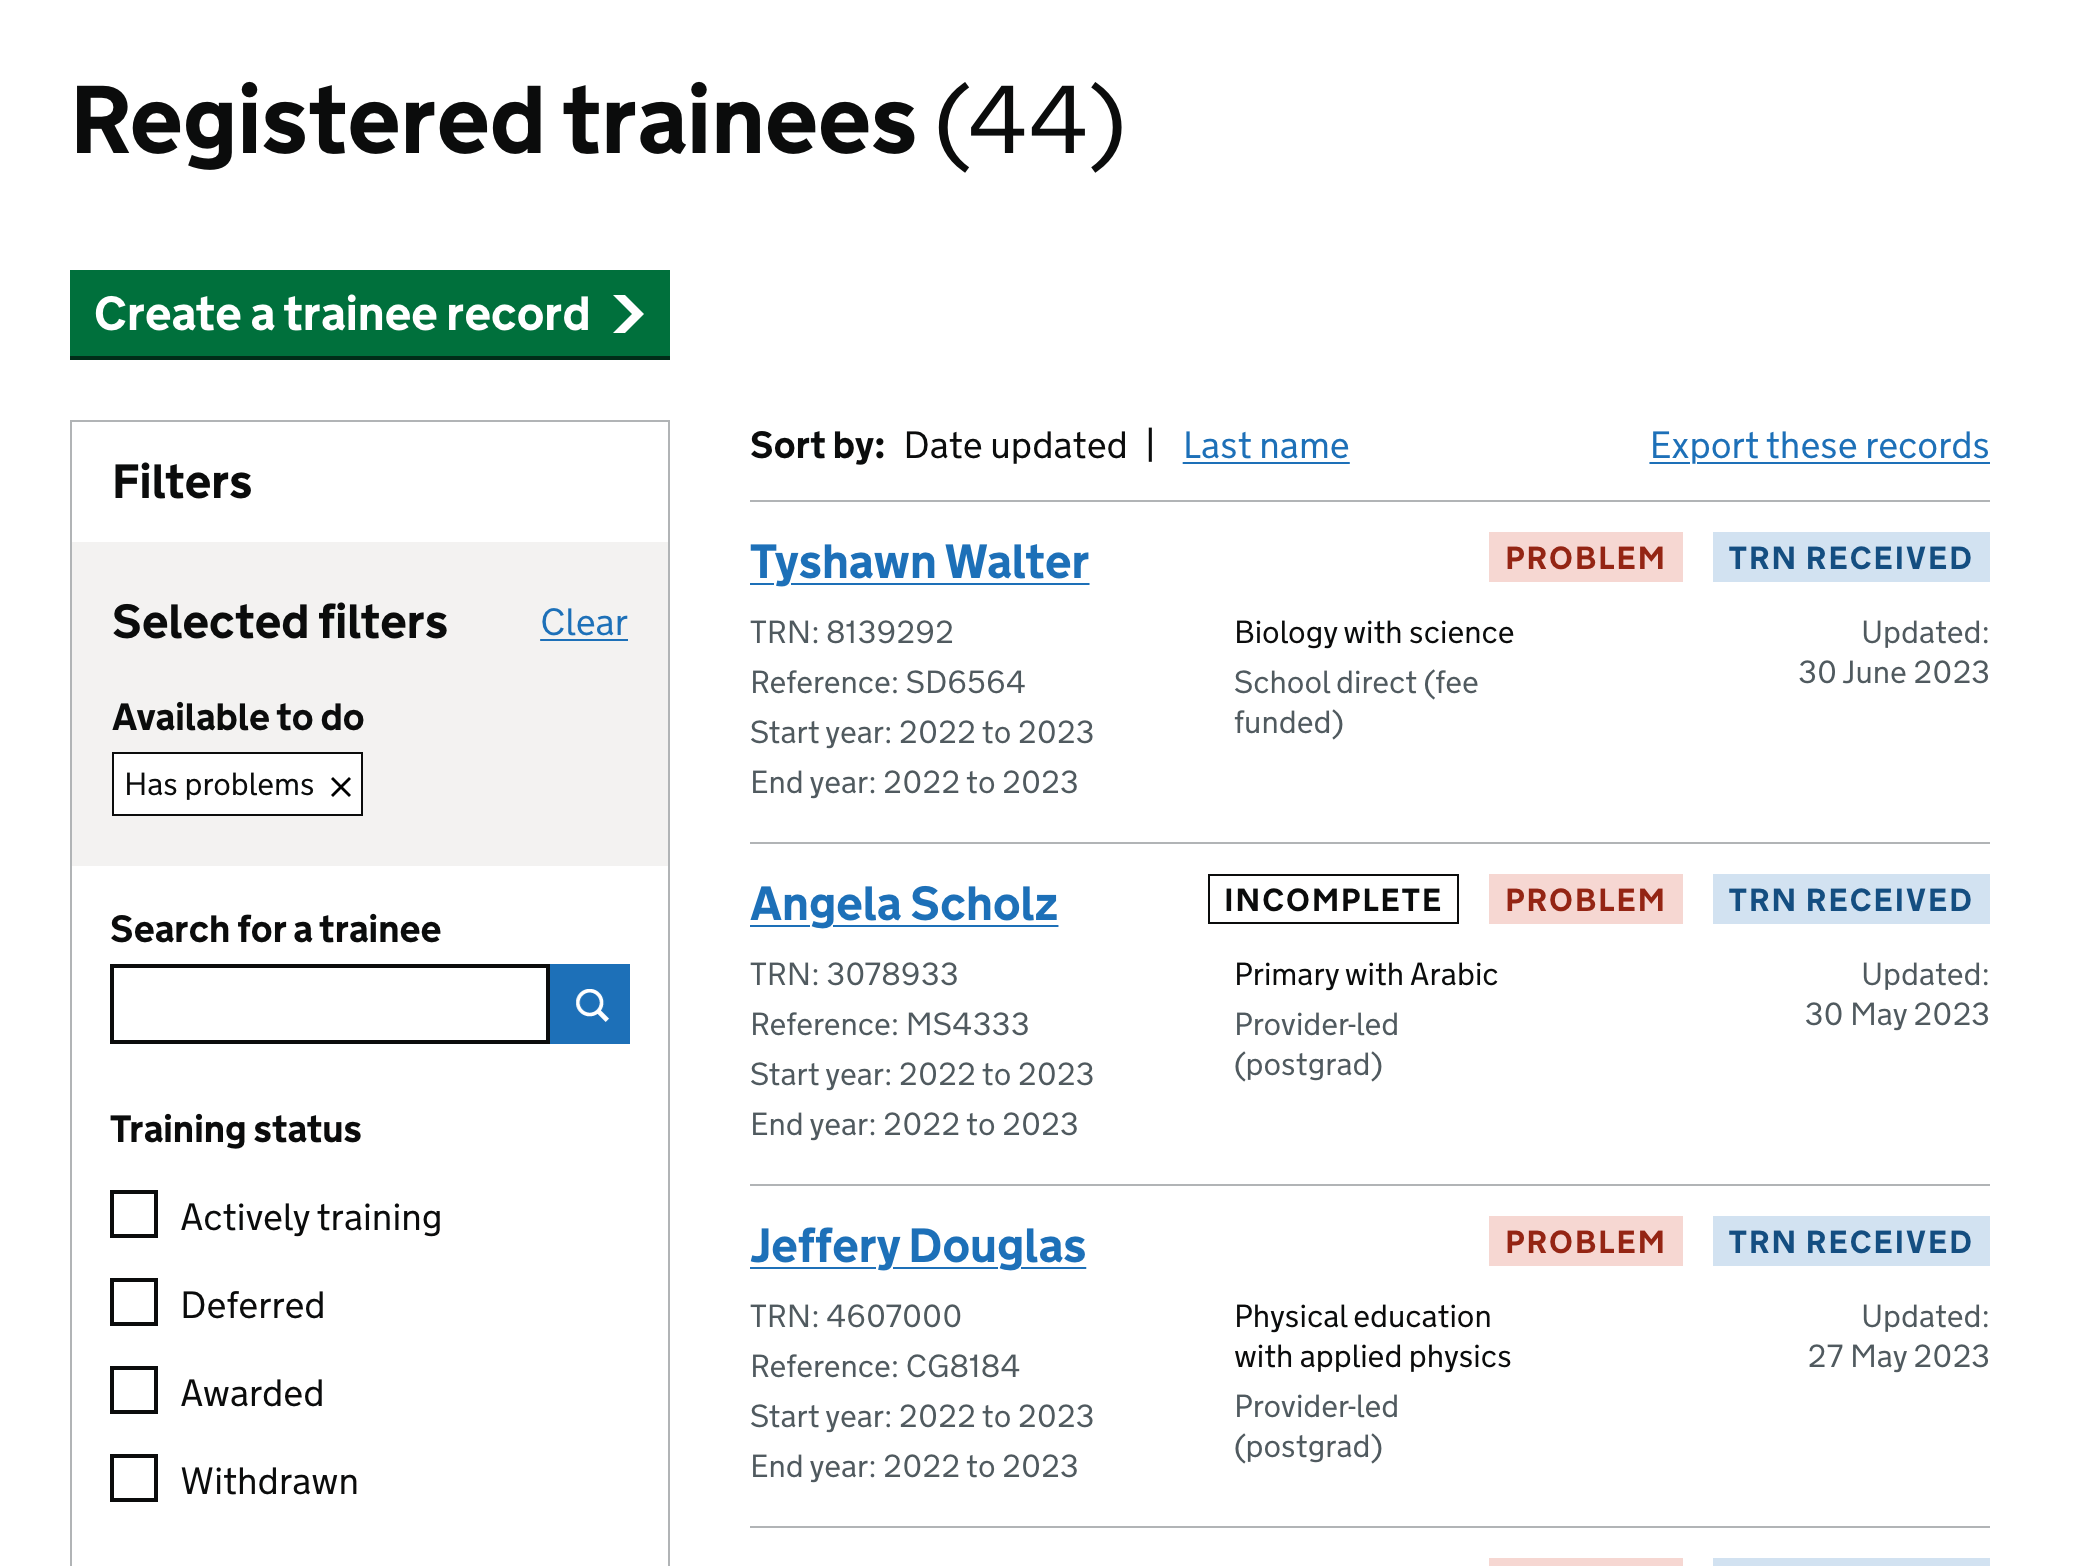 The registered trainees page with the new ‘has problems’ filter selected. The records in the list all have the new ‘problem’ tag.